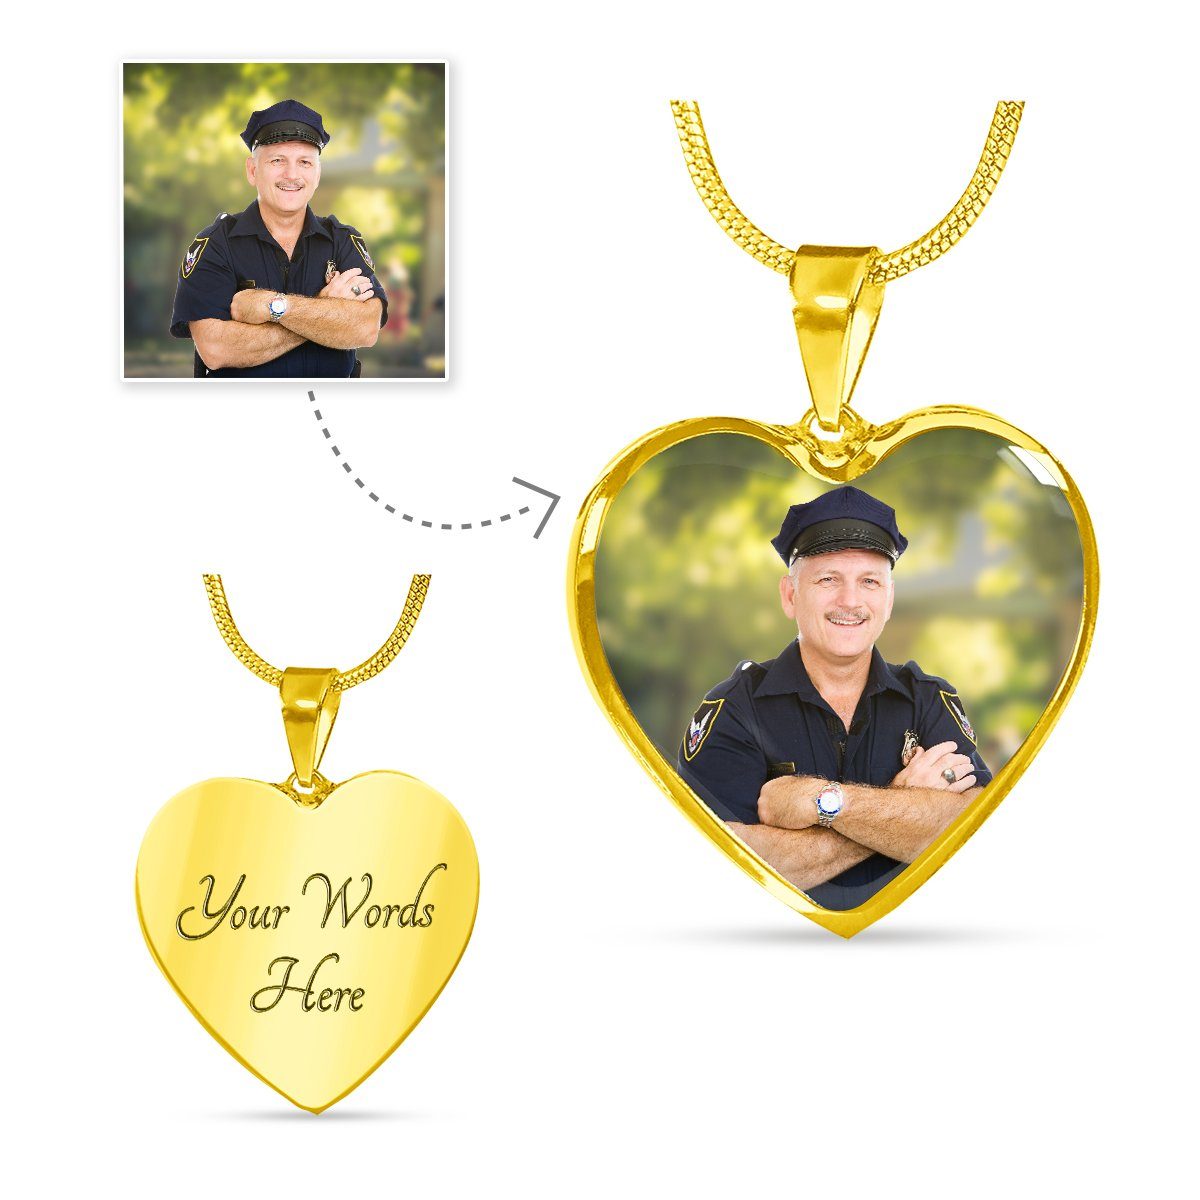 Law Enforcement Personalized Photo Heart Necklace - Heroic Defender